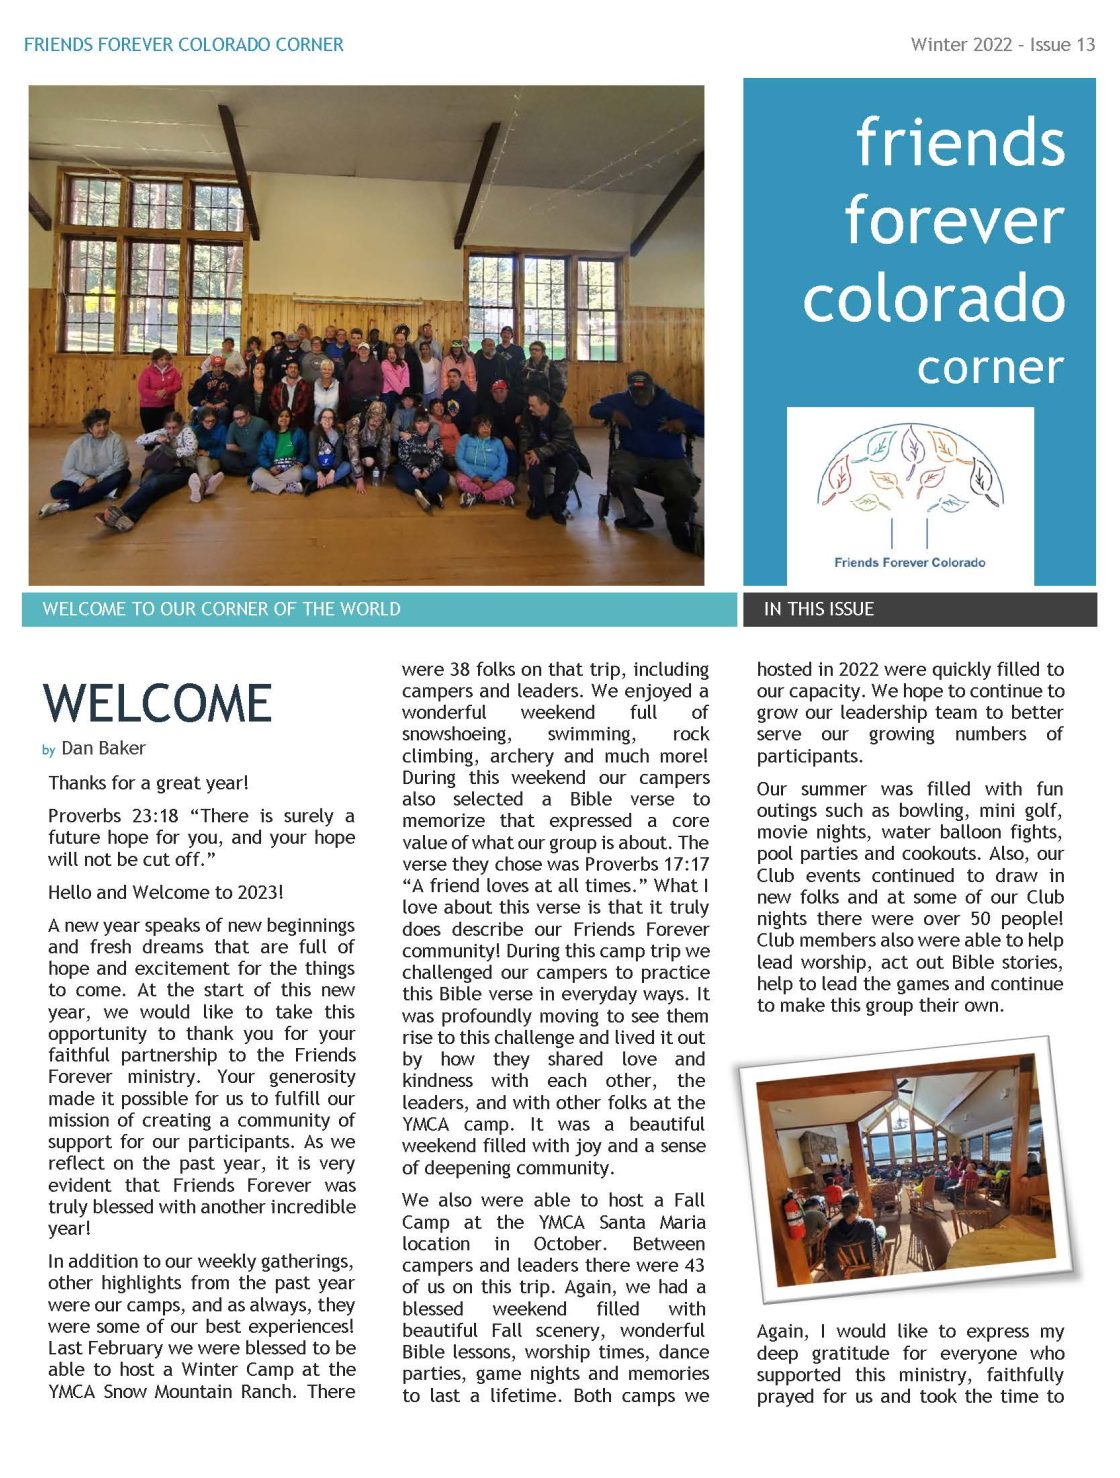 Newsletter page 1 Winter 2022